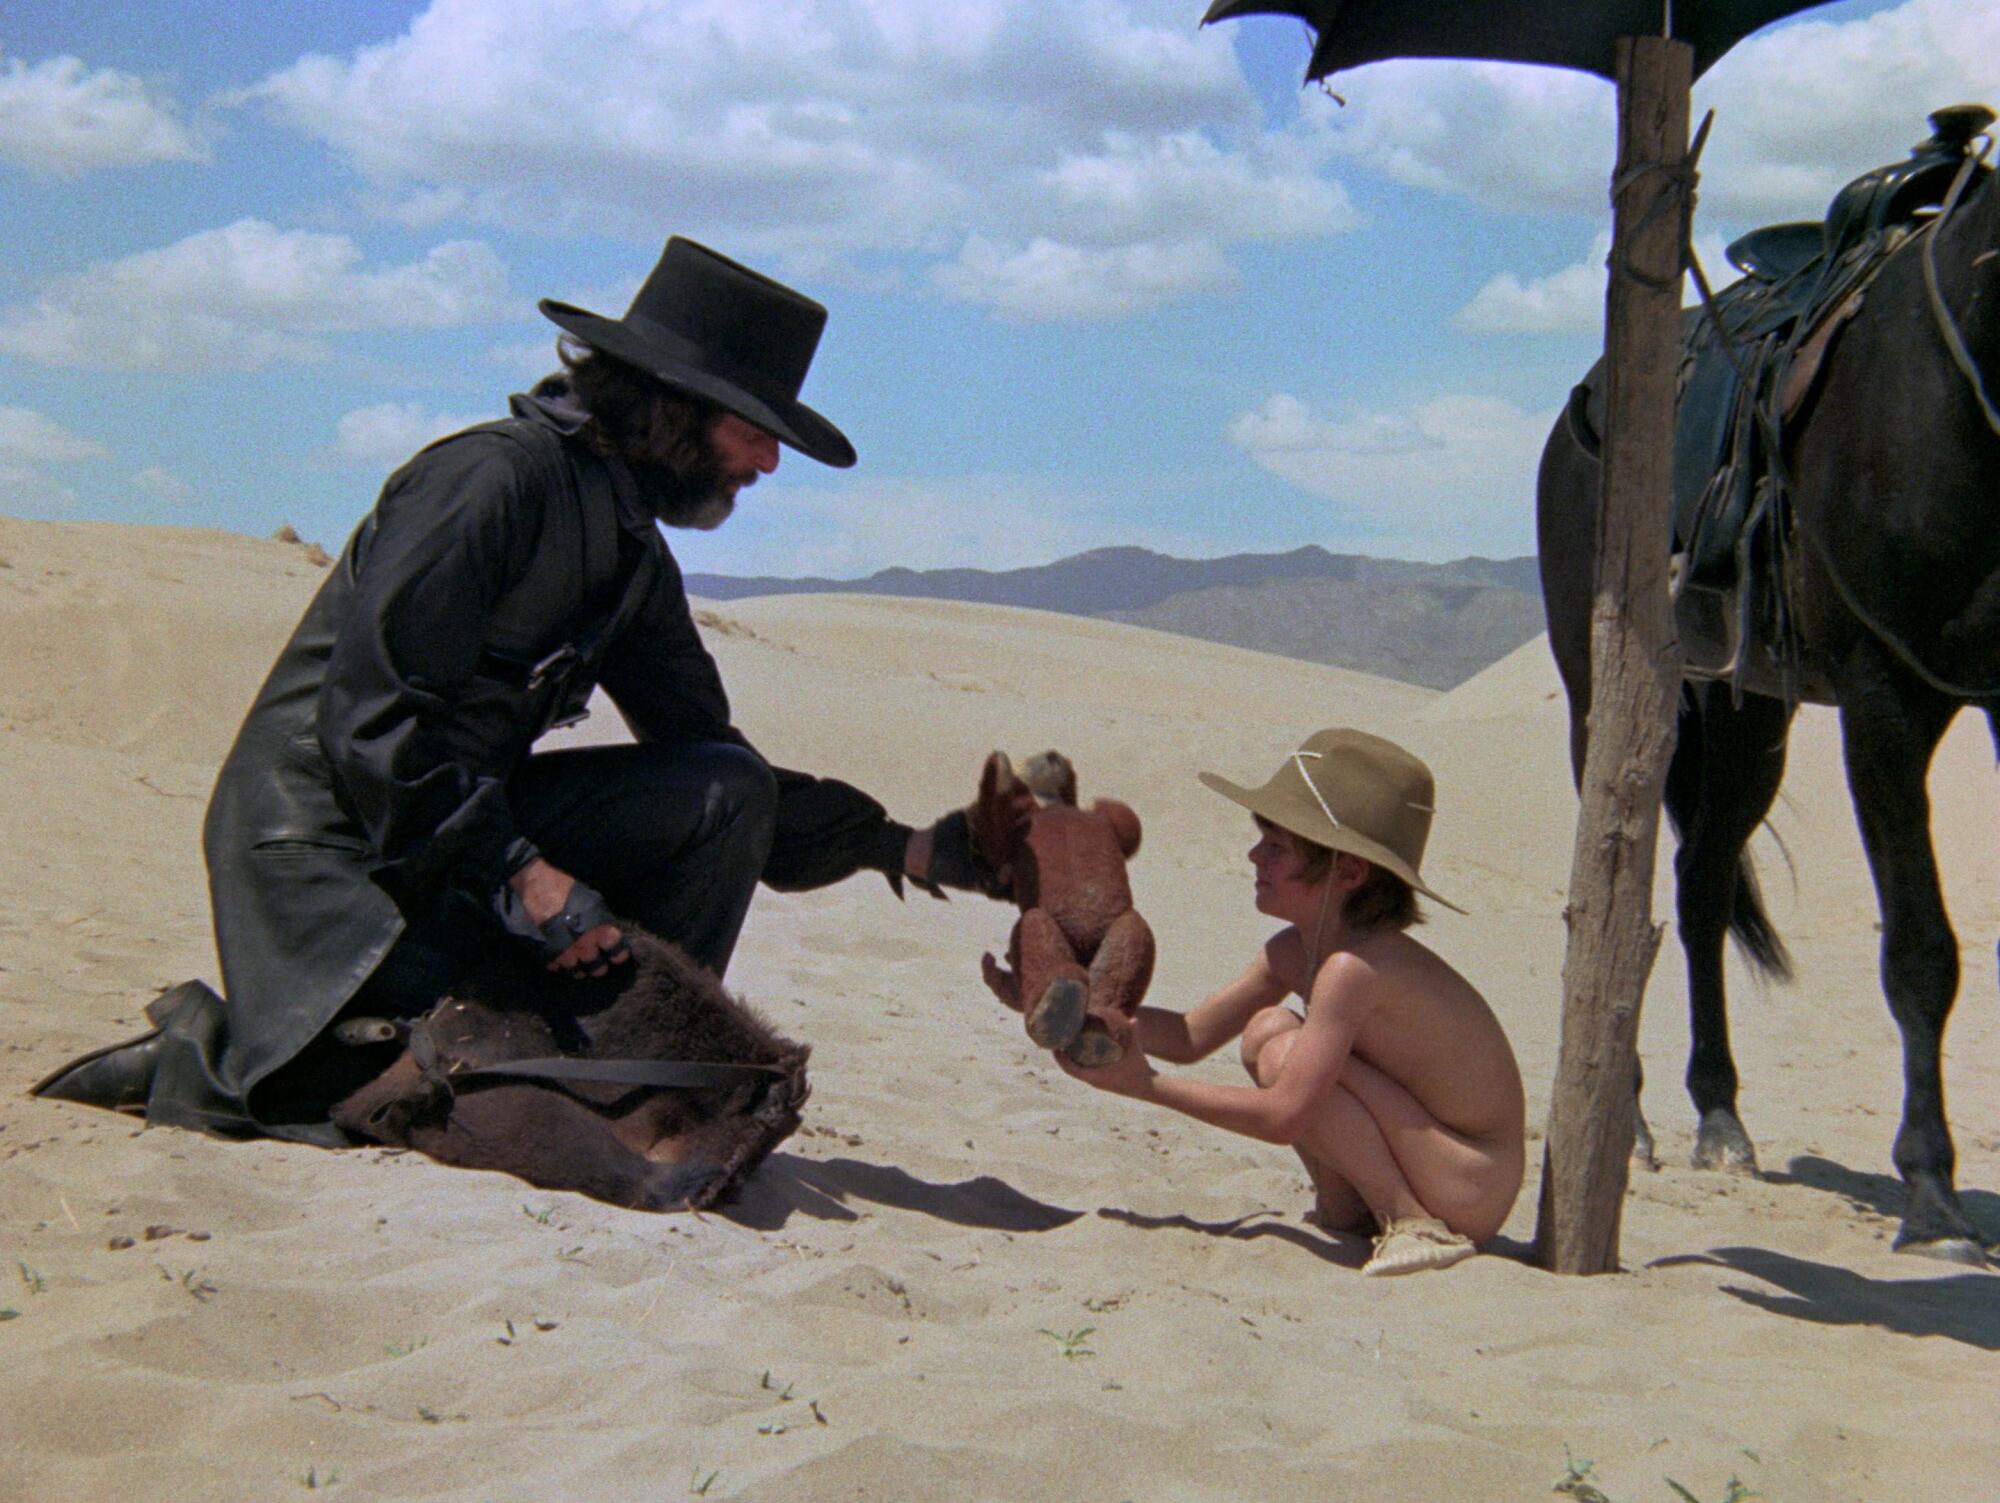 A man in a black hat connects with a boy.